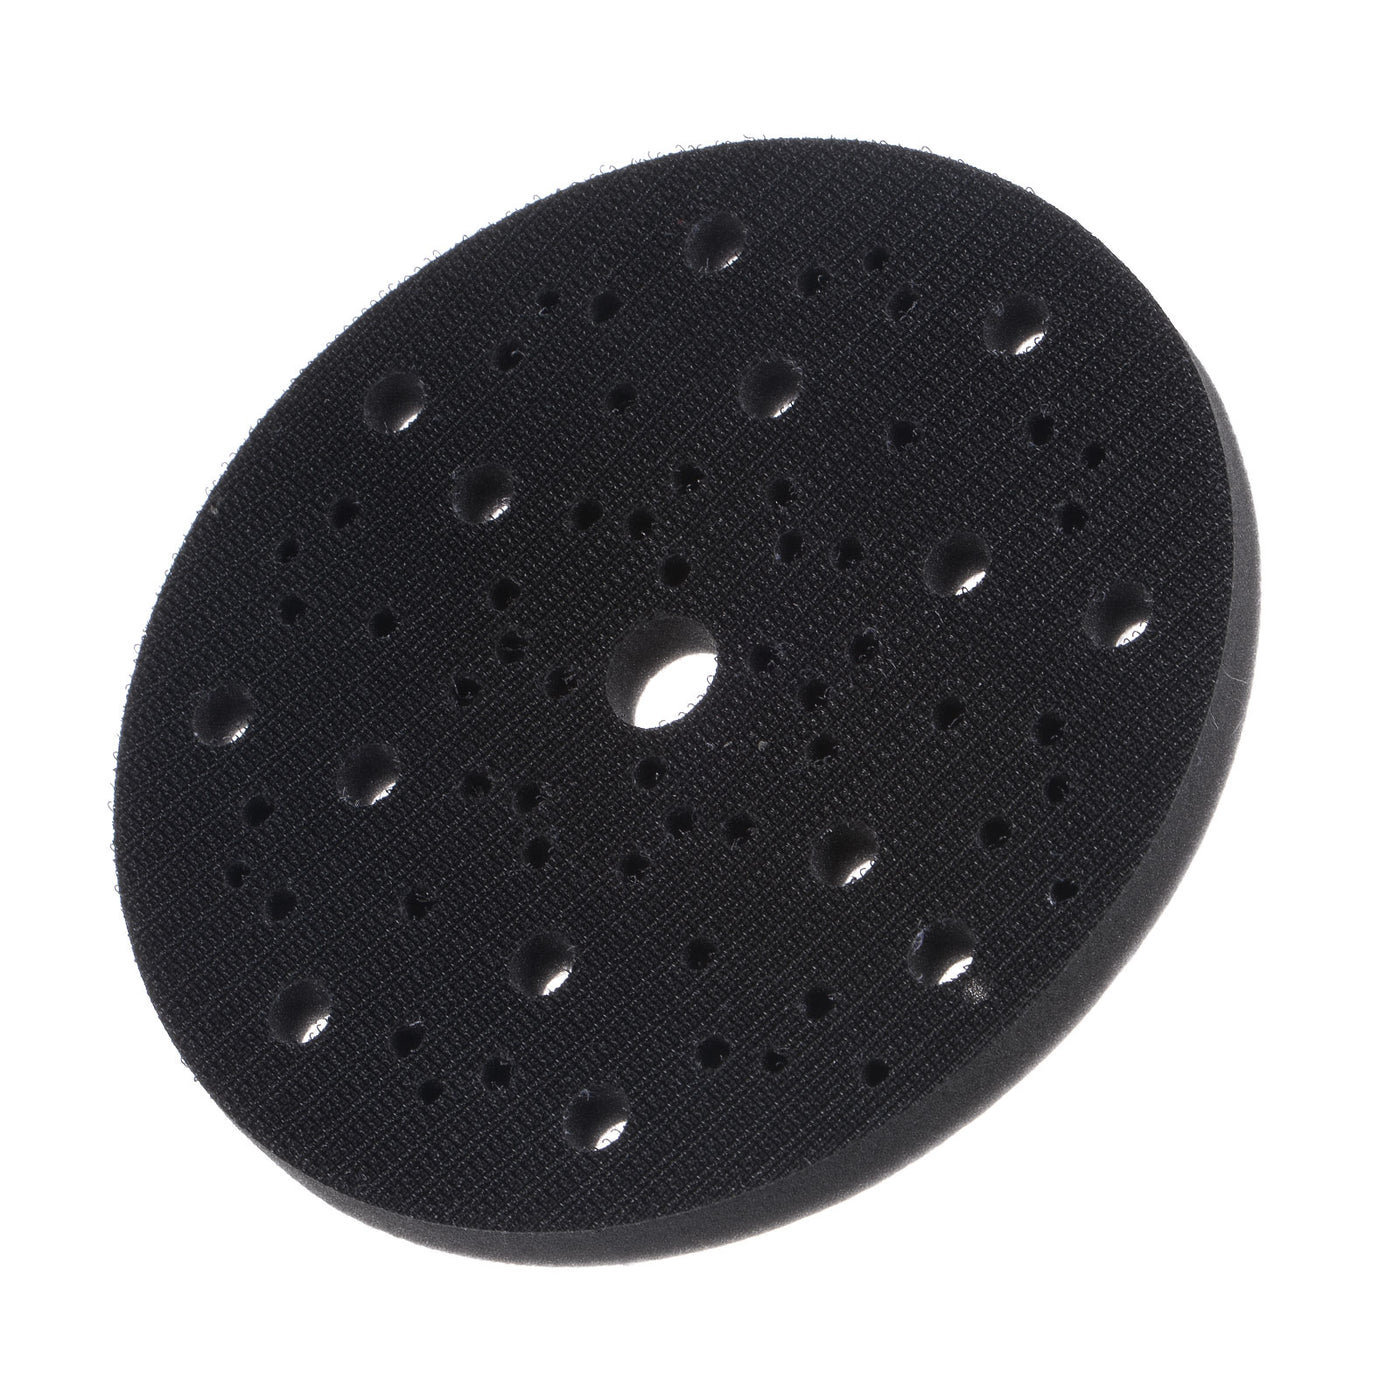 uxcell Uxcell 6 Inch 53 Holes Sponge Interface Pad Soft Density Hook and Loop Cushion Buffer Backing Pad for Electric Sander